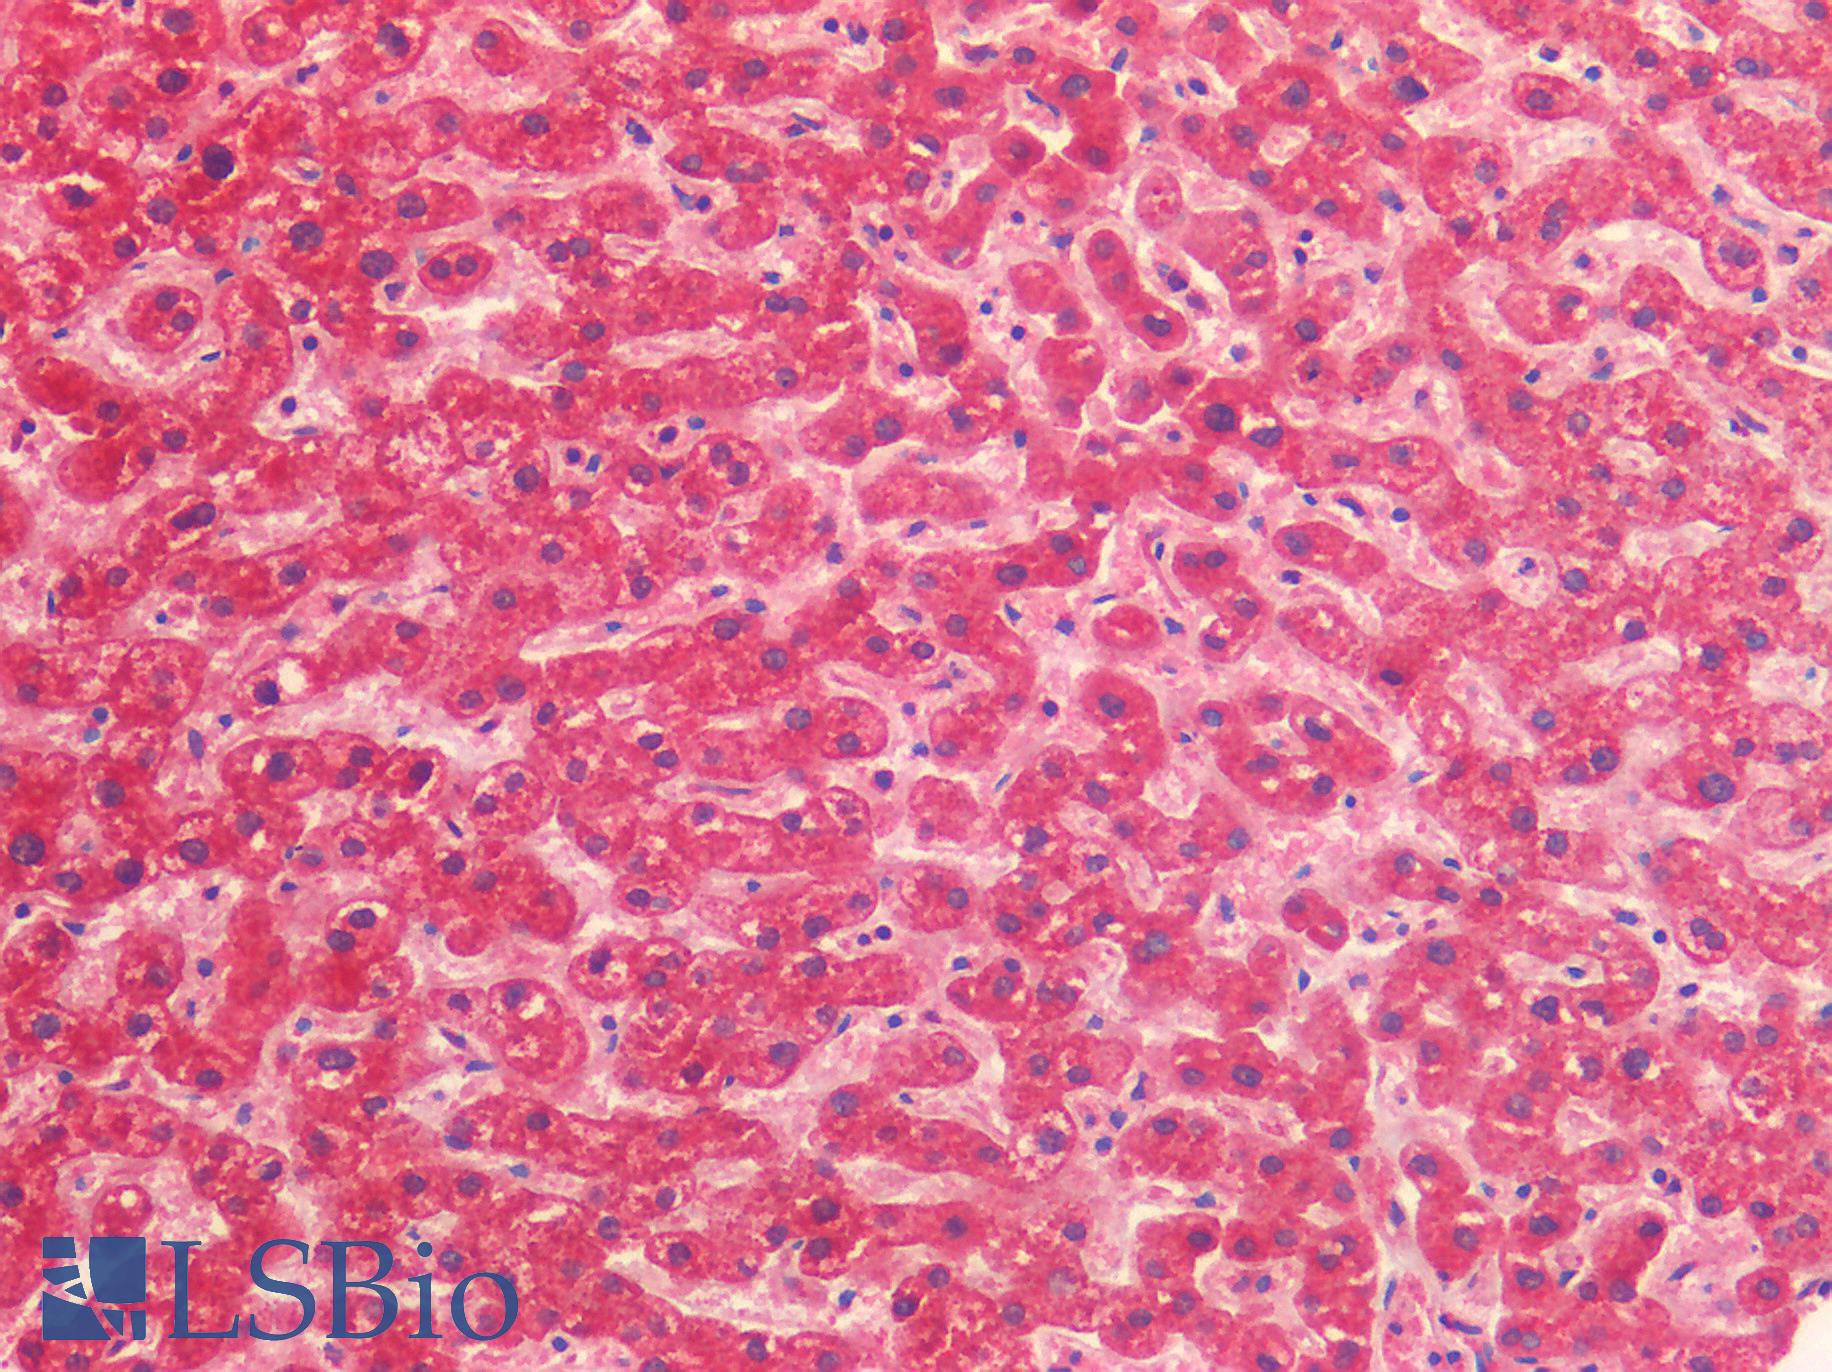 PPIF / Cyclophilin F Antibody - Human Liver: Formalin-Fixed, Paraffin-Embedded (FFPE)